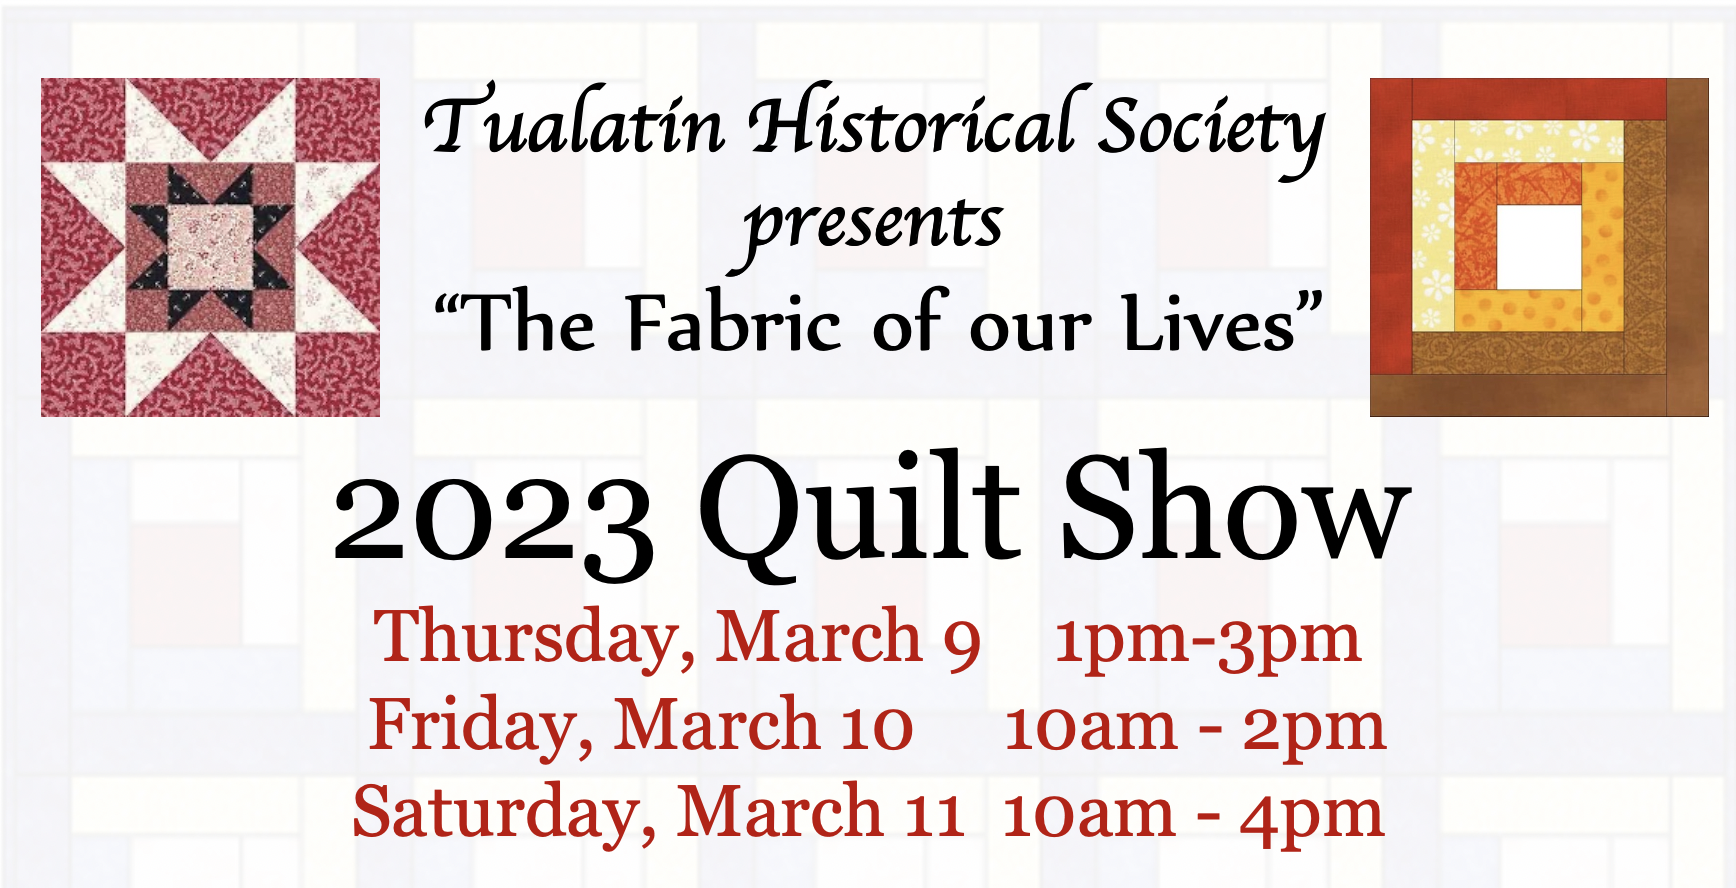 The Fabric of Our Lives -2023 Quilt Show